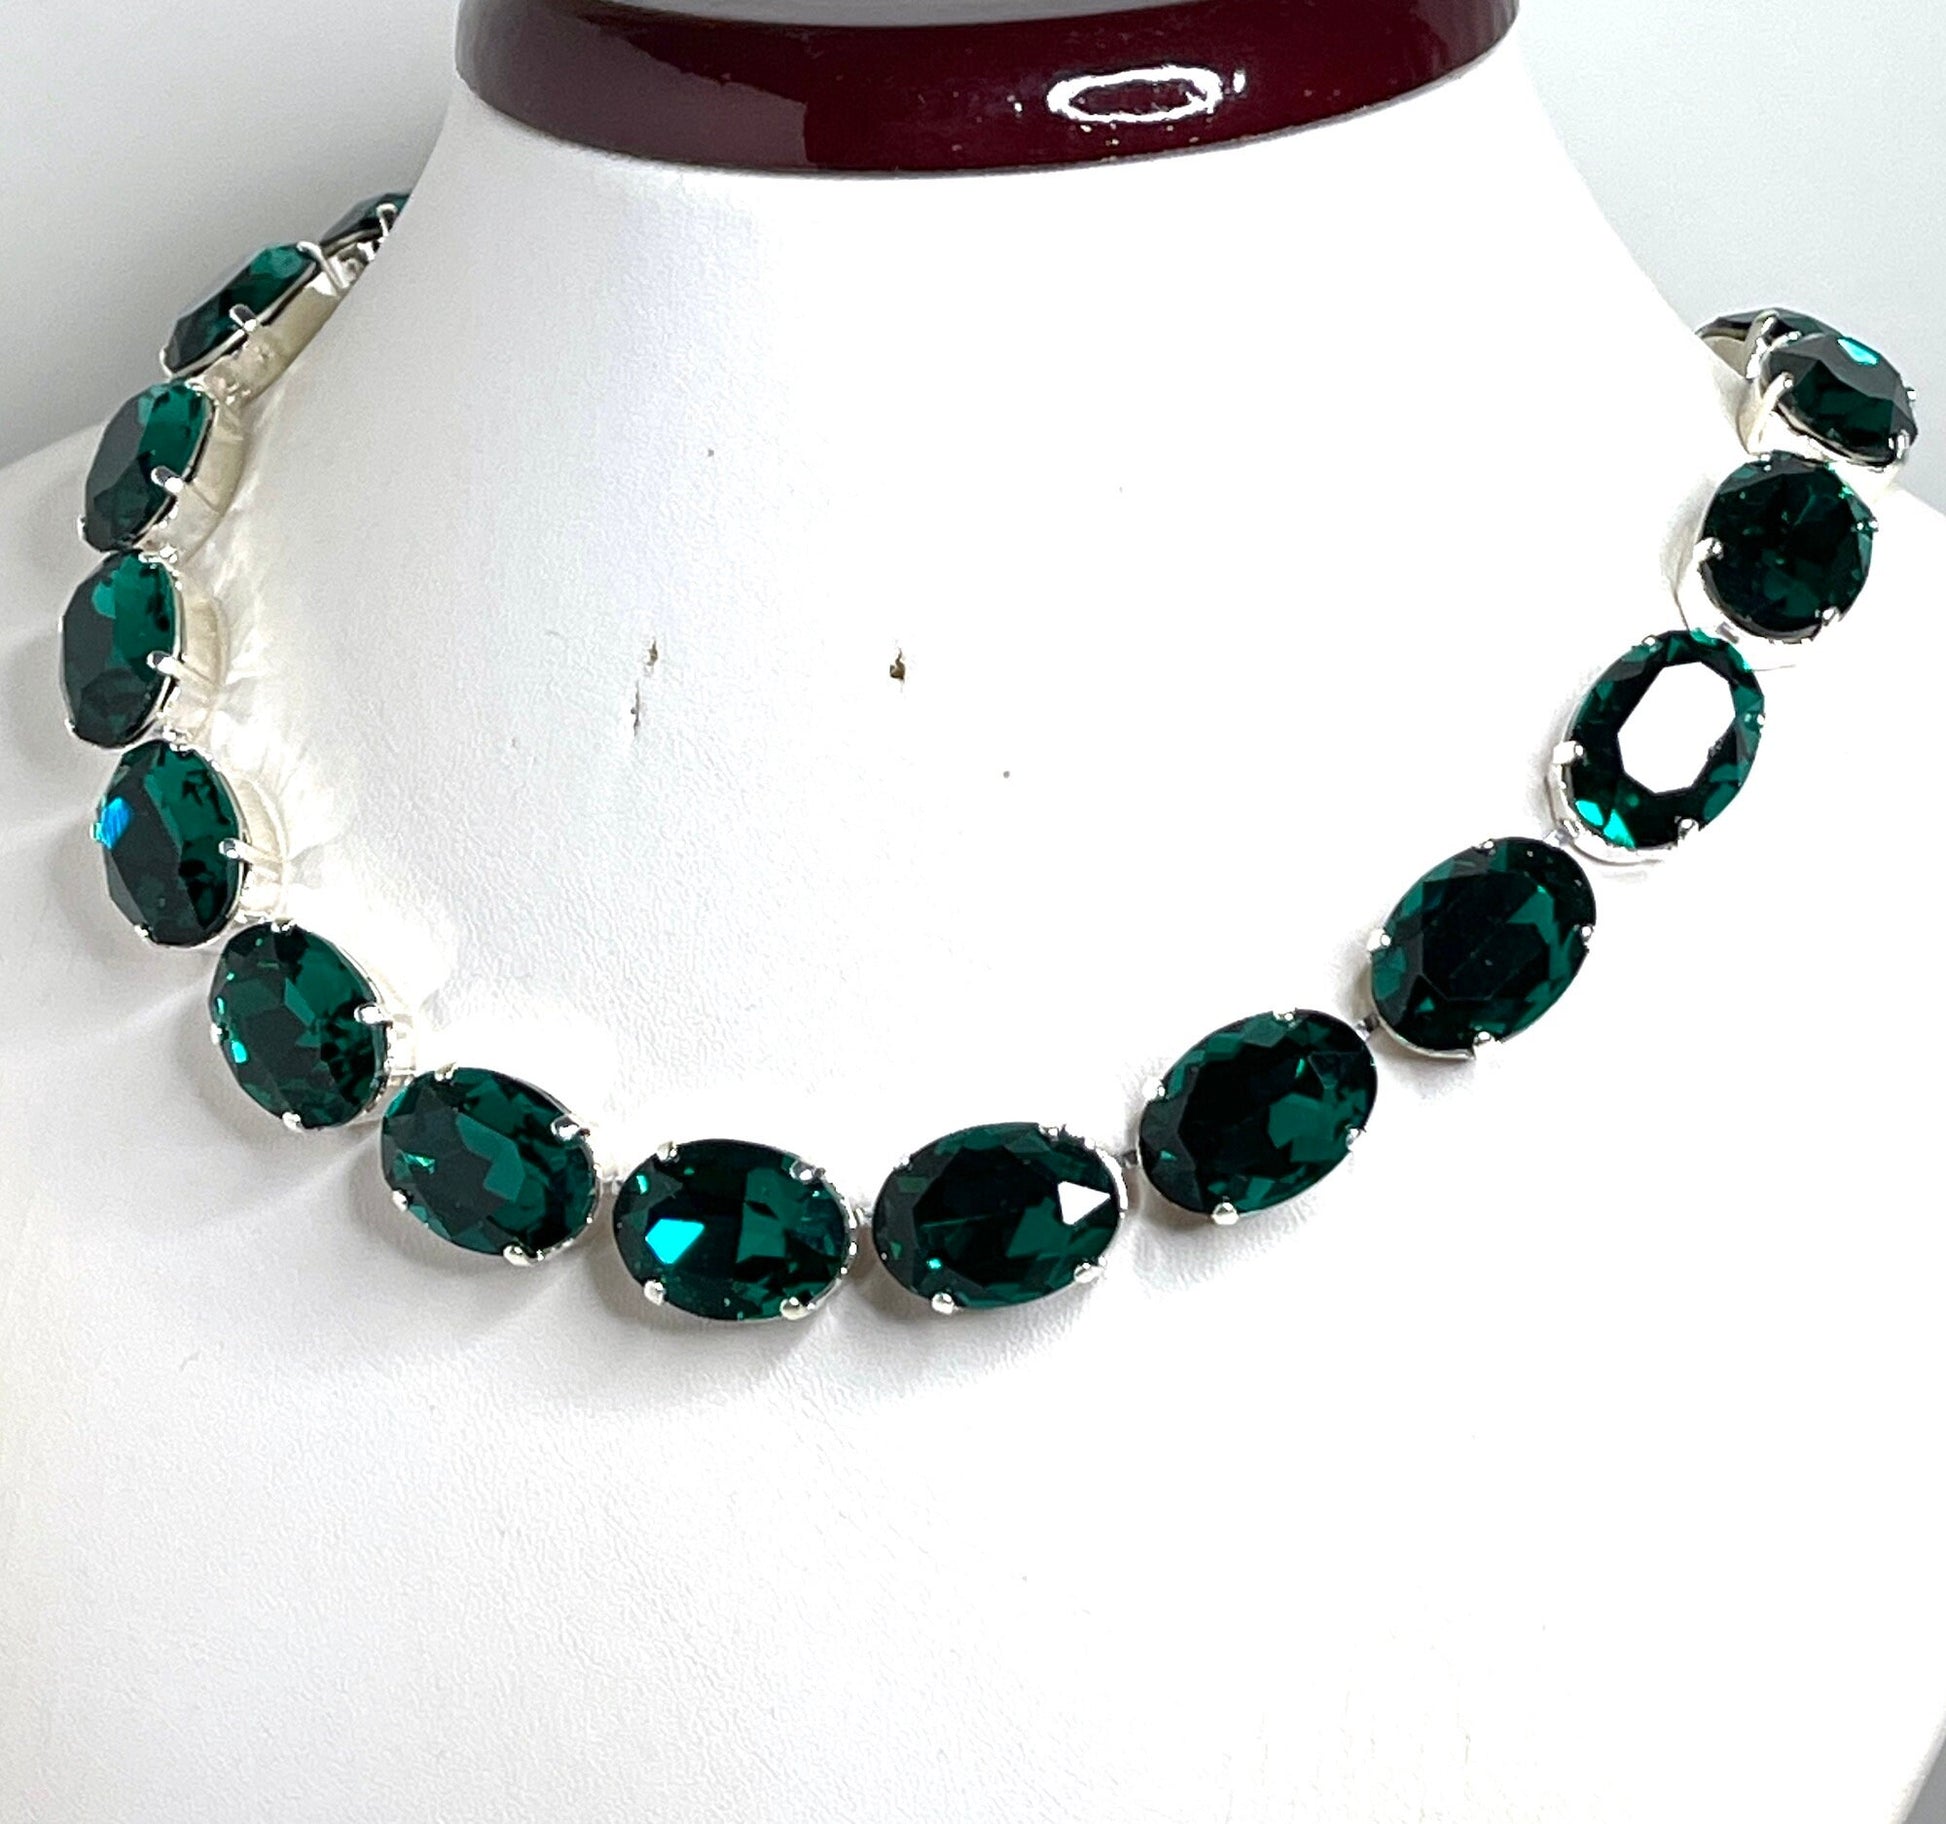 Peridot Aquamarine Georgian Collet Necklaces, Emerald Crystal Choker, Anna Wintour Style, Riviere Necklace, Necklaces for Women